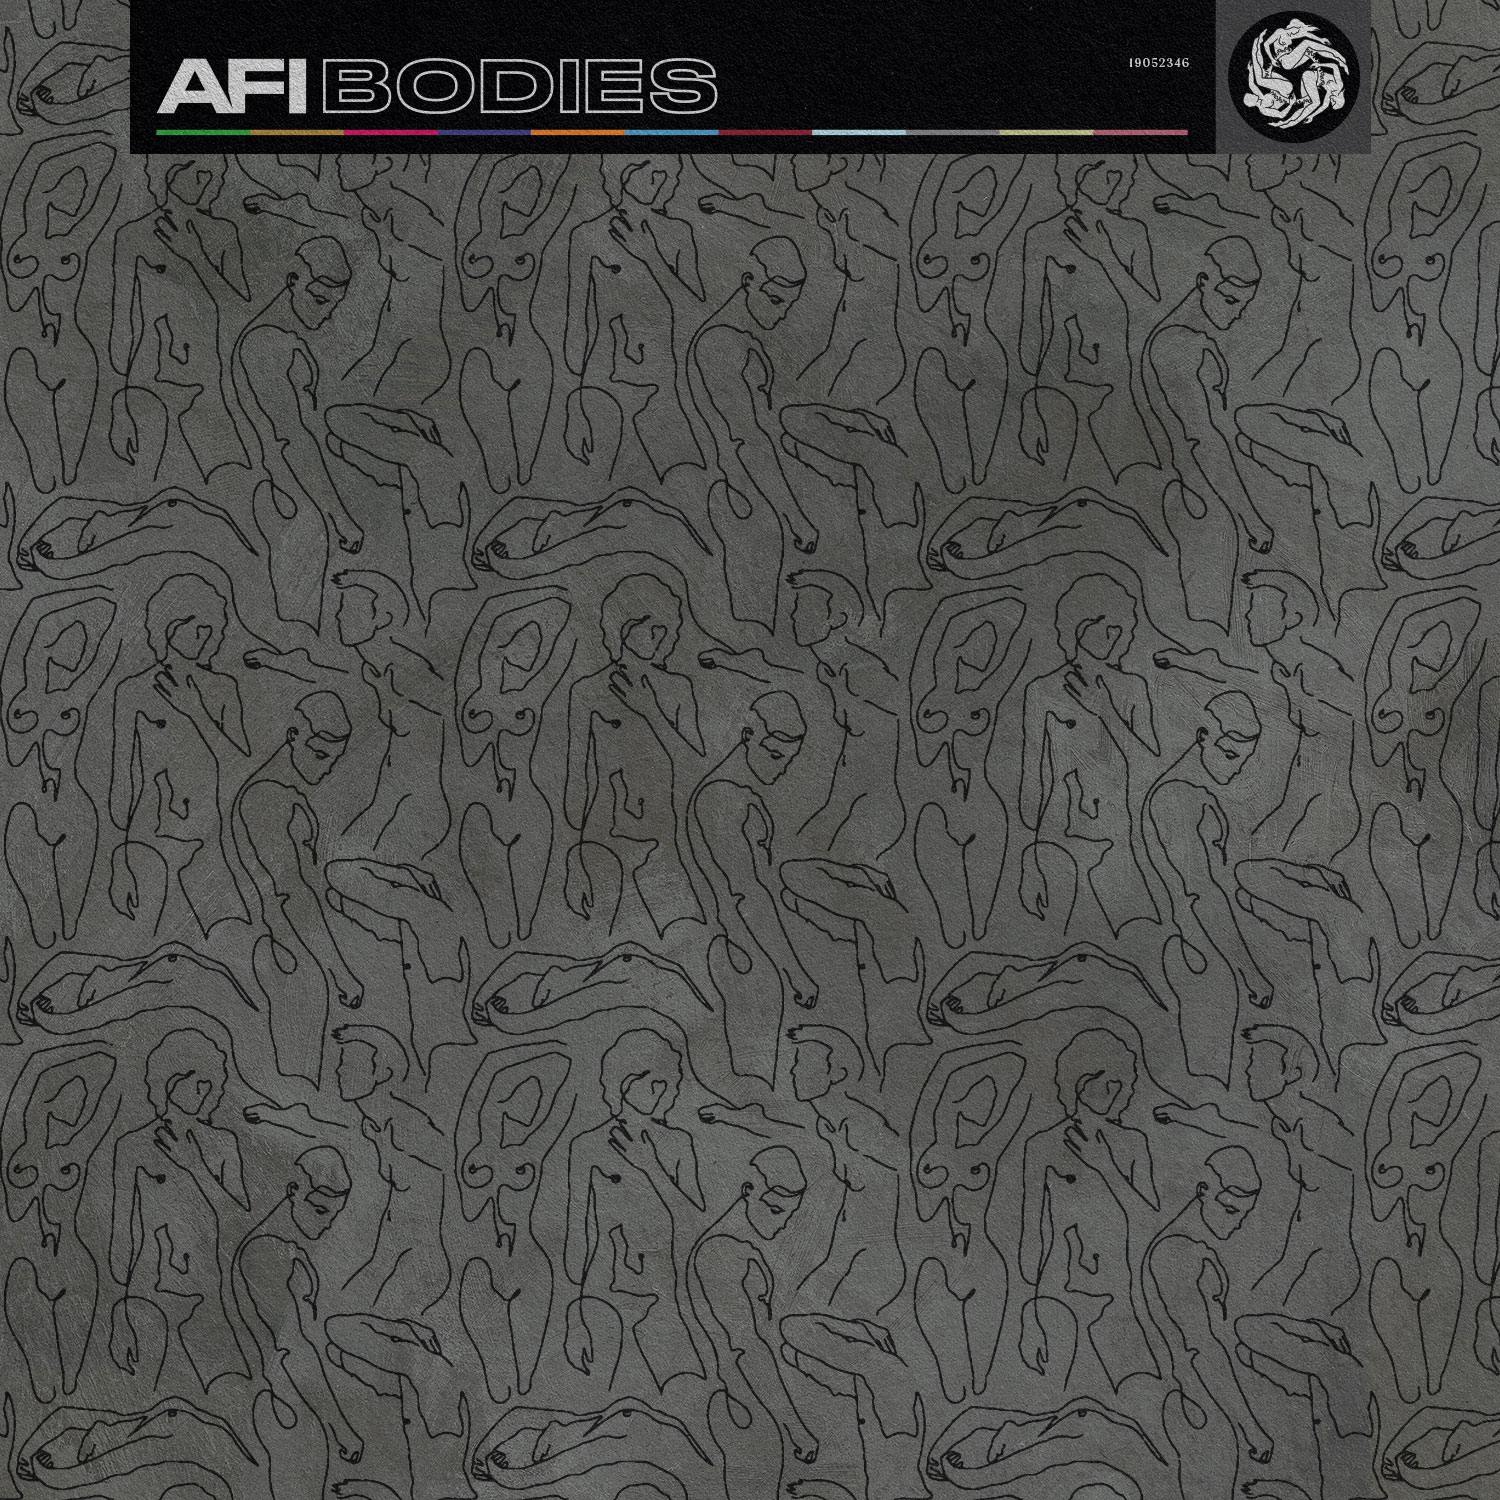 AFI - BODIES - Out June 11